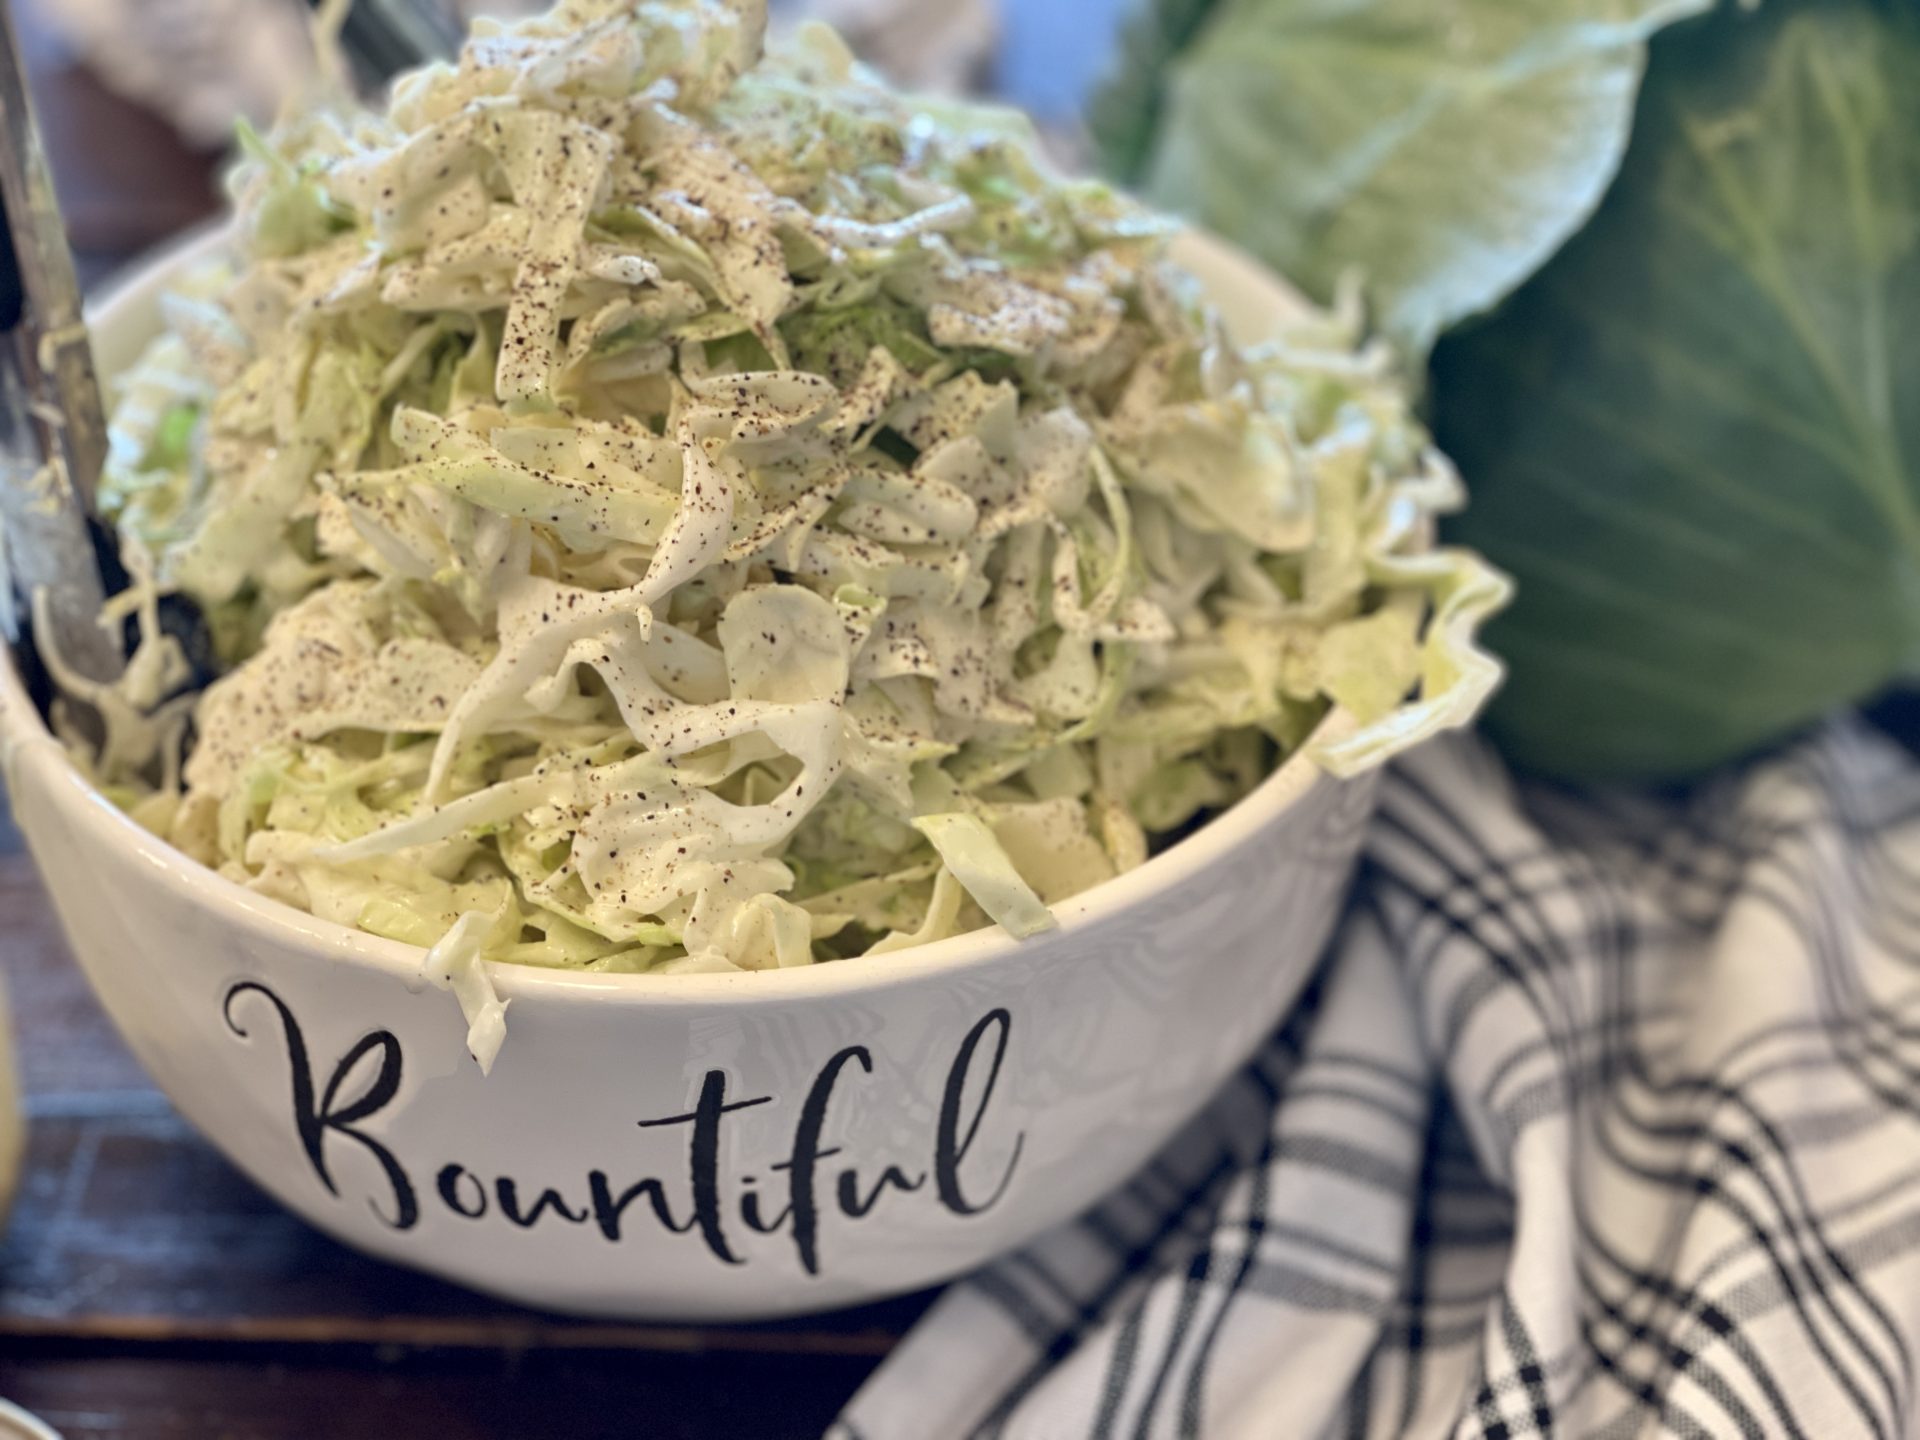 Simple Creamy Cole Slaw Dressing from Farmwife Feeds. A quick easy homemade slaw dressing that is easy to make and keep on hand for an easy Cole Slaw side dish for any meal. #coleslaw #homemade #easy